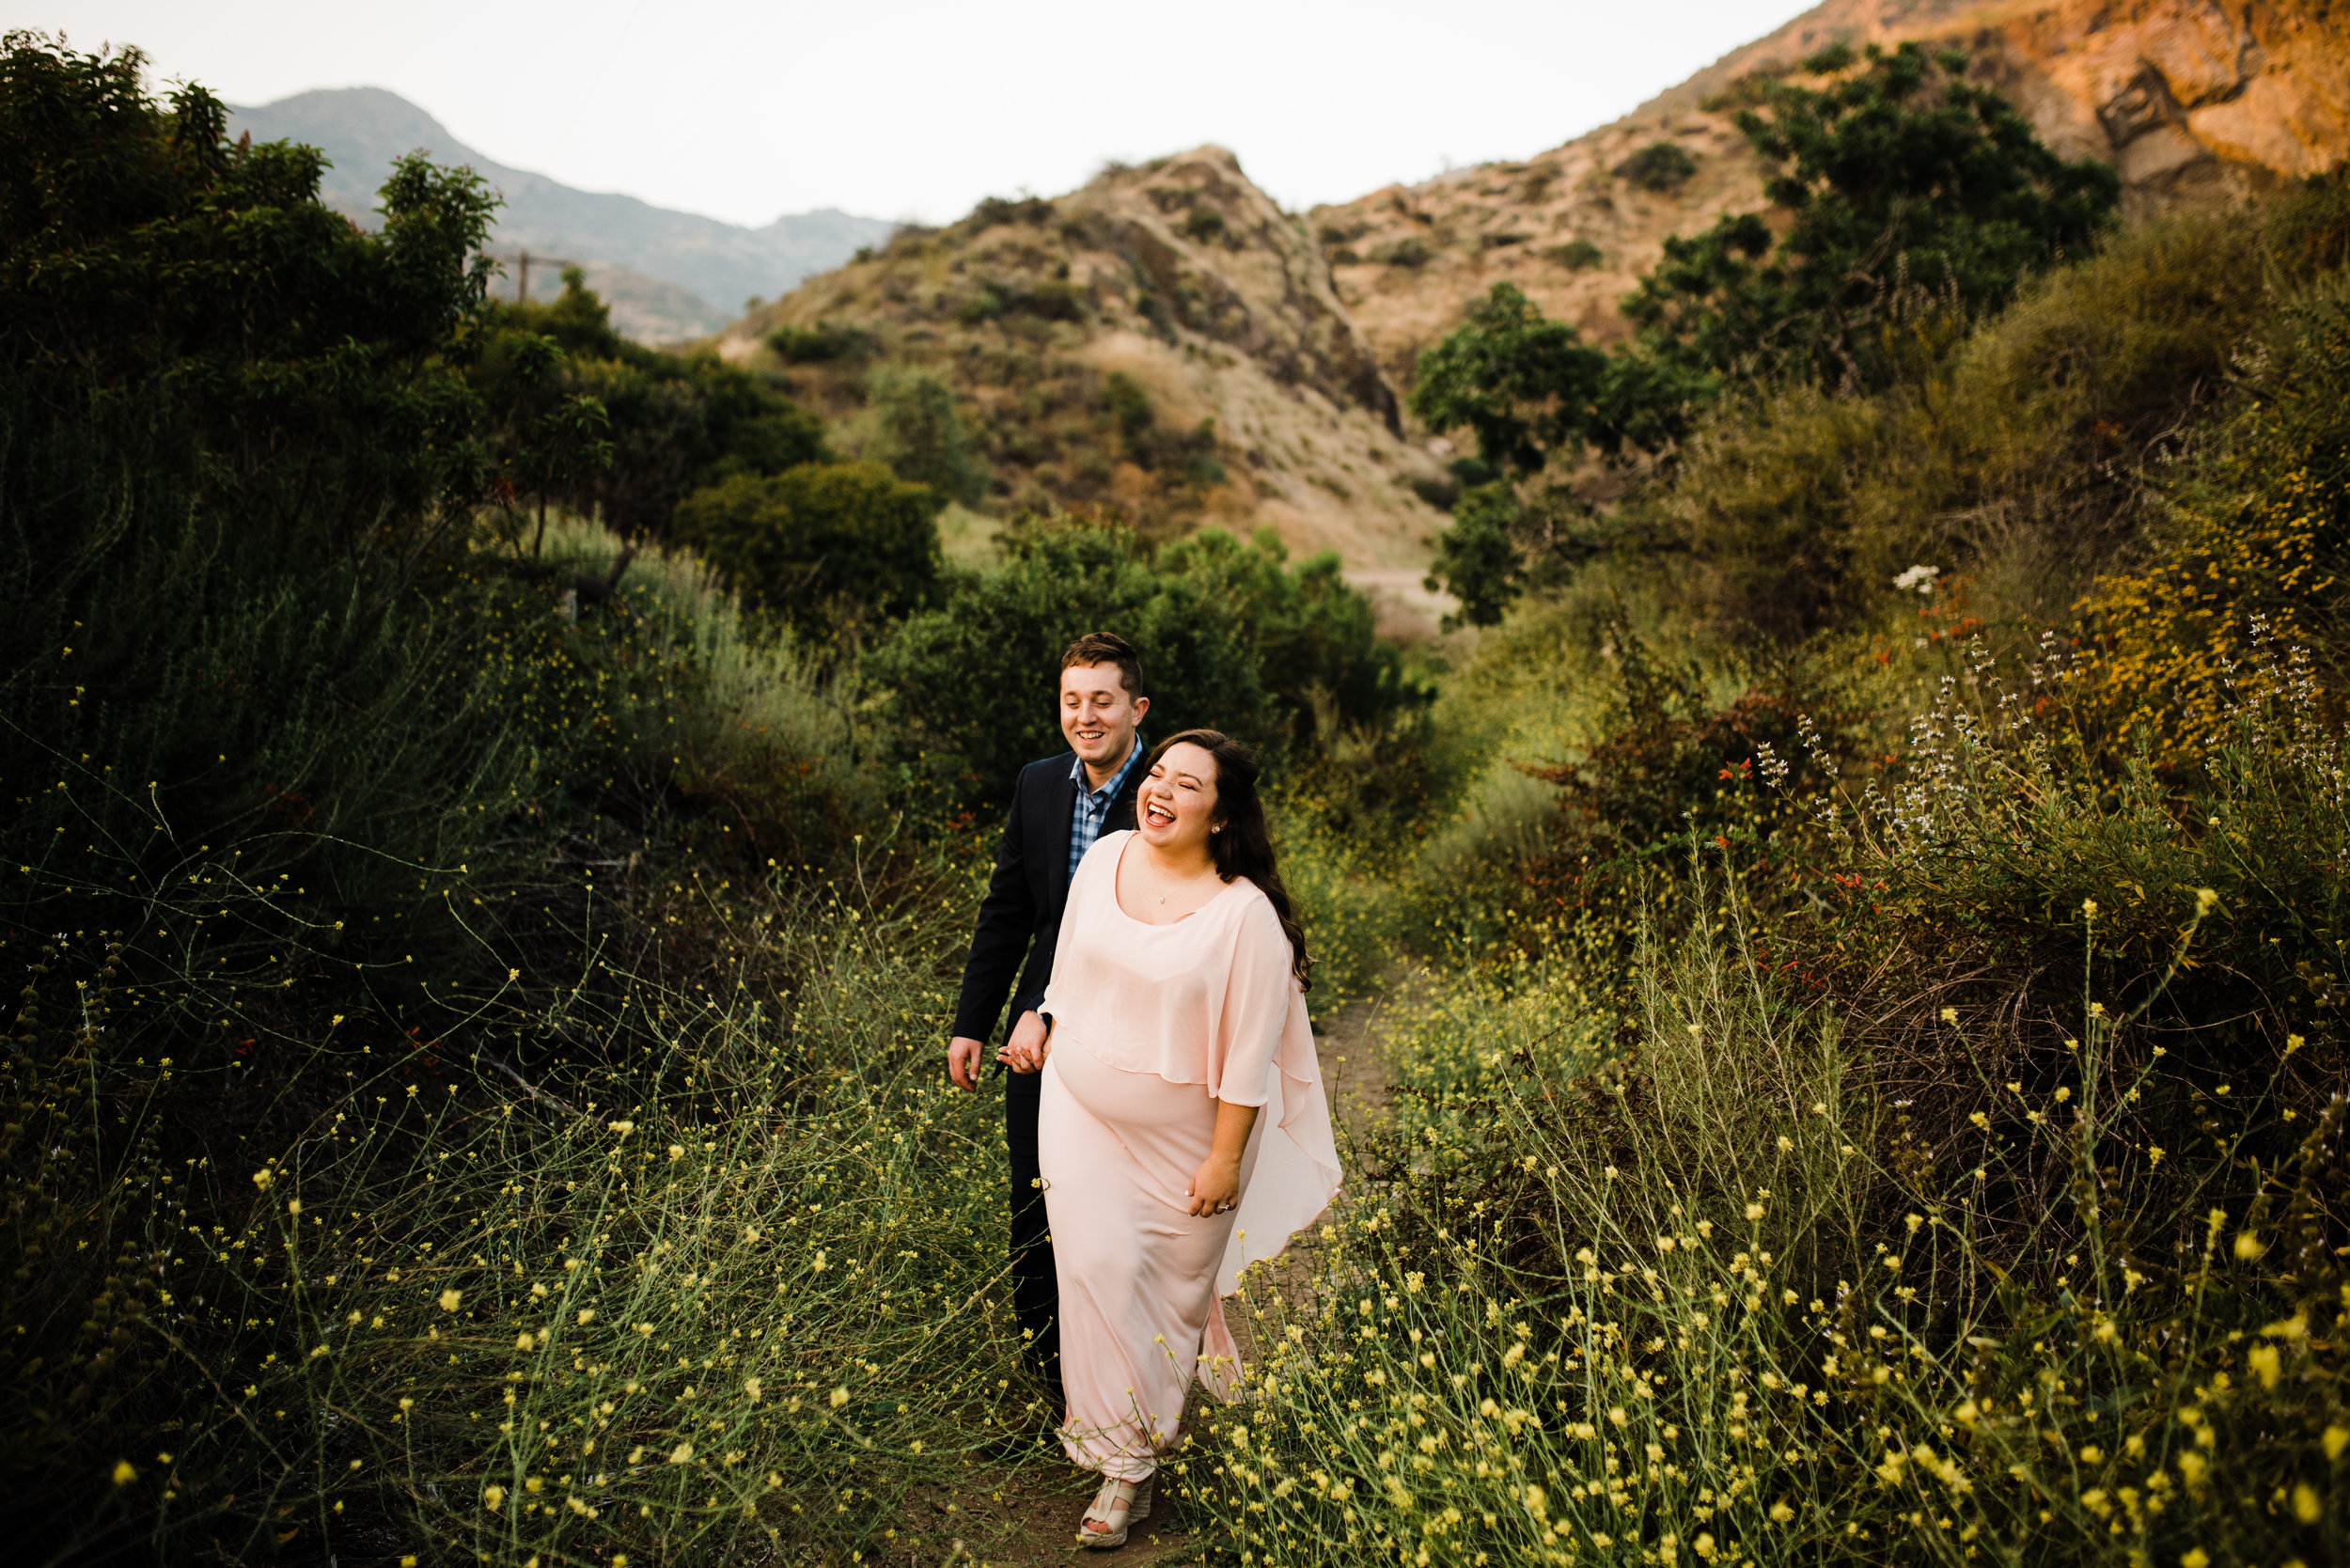 Couple walking through wildflowers and mountains in Los Angeles, California for their adventurous engagement shoot